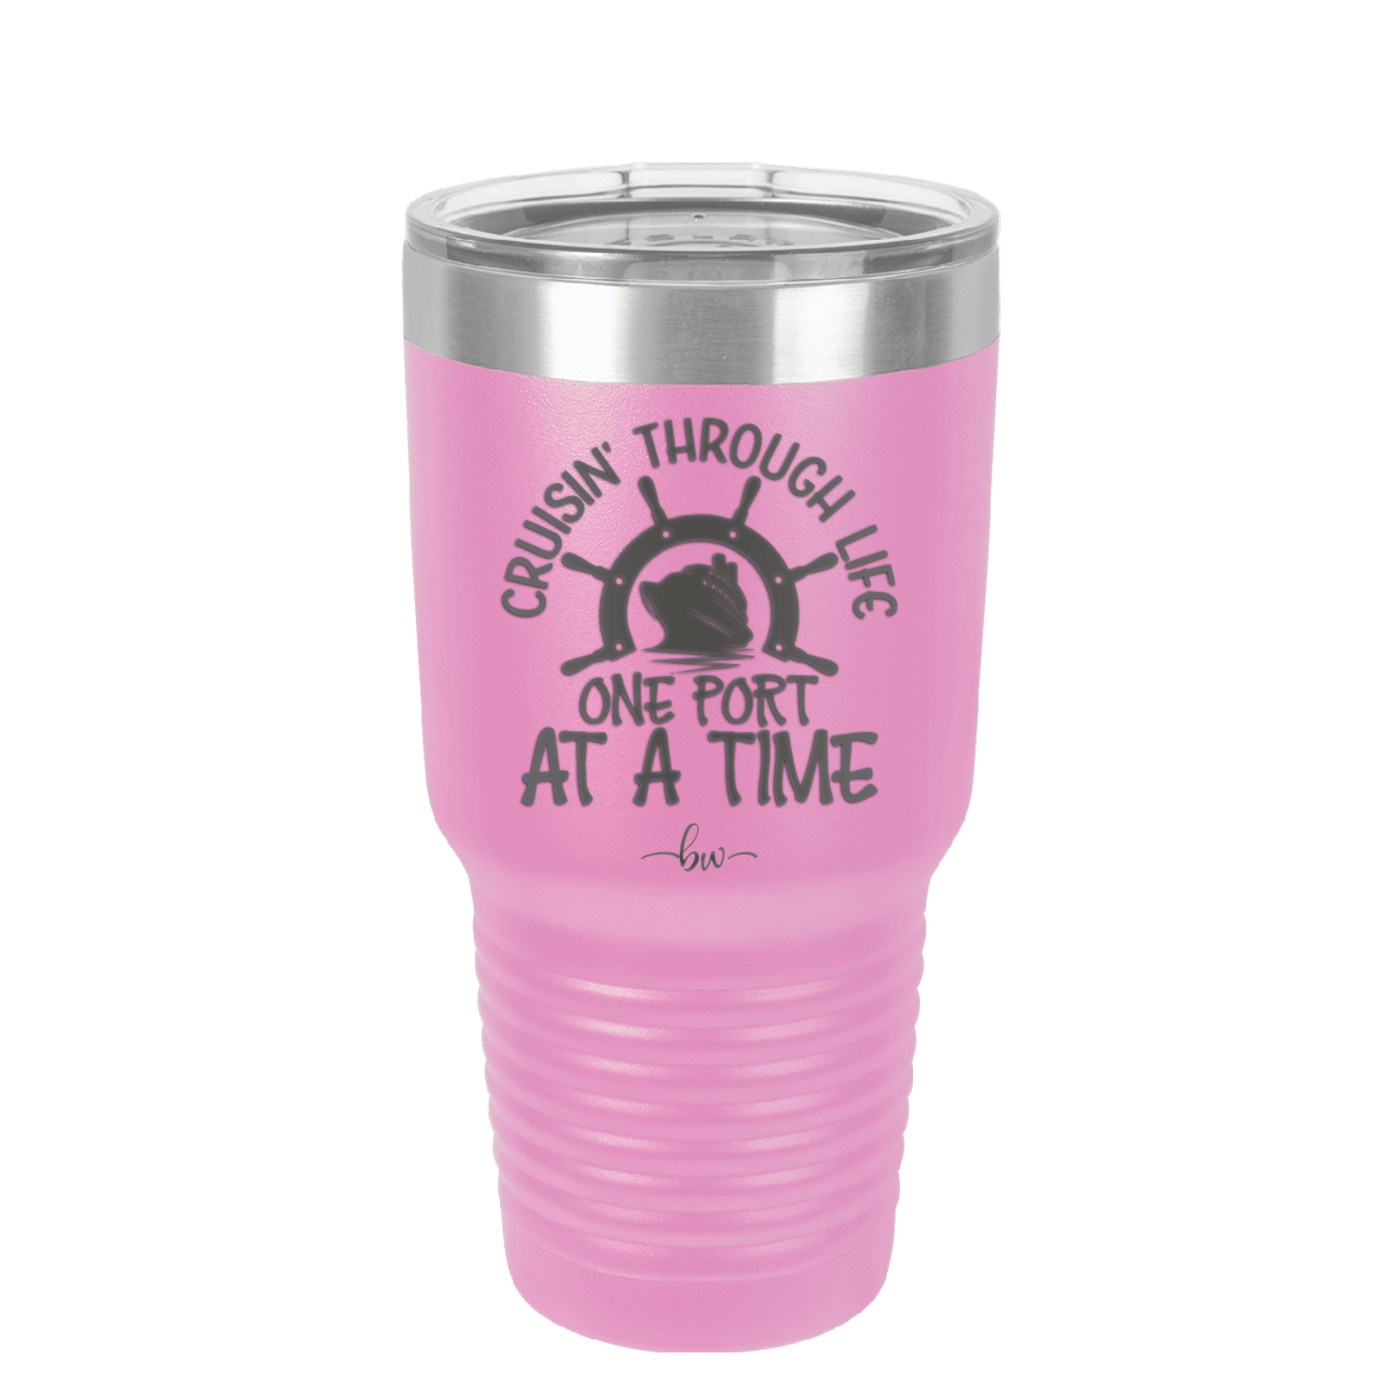 Cruisin Through Life One Port at a Time Cruise 3 - Laser Engraved Stainless Steel Drinkware - 1449 -